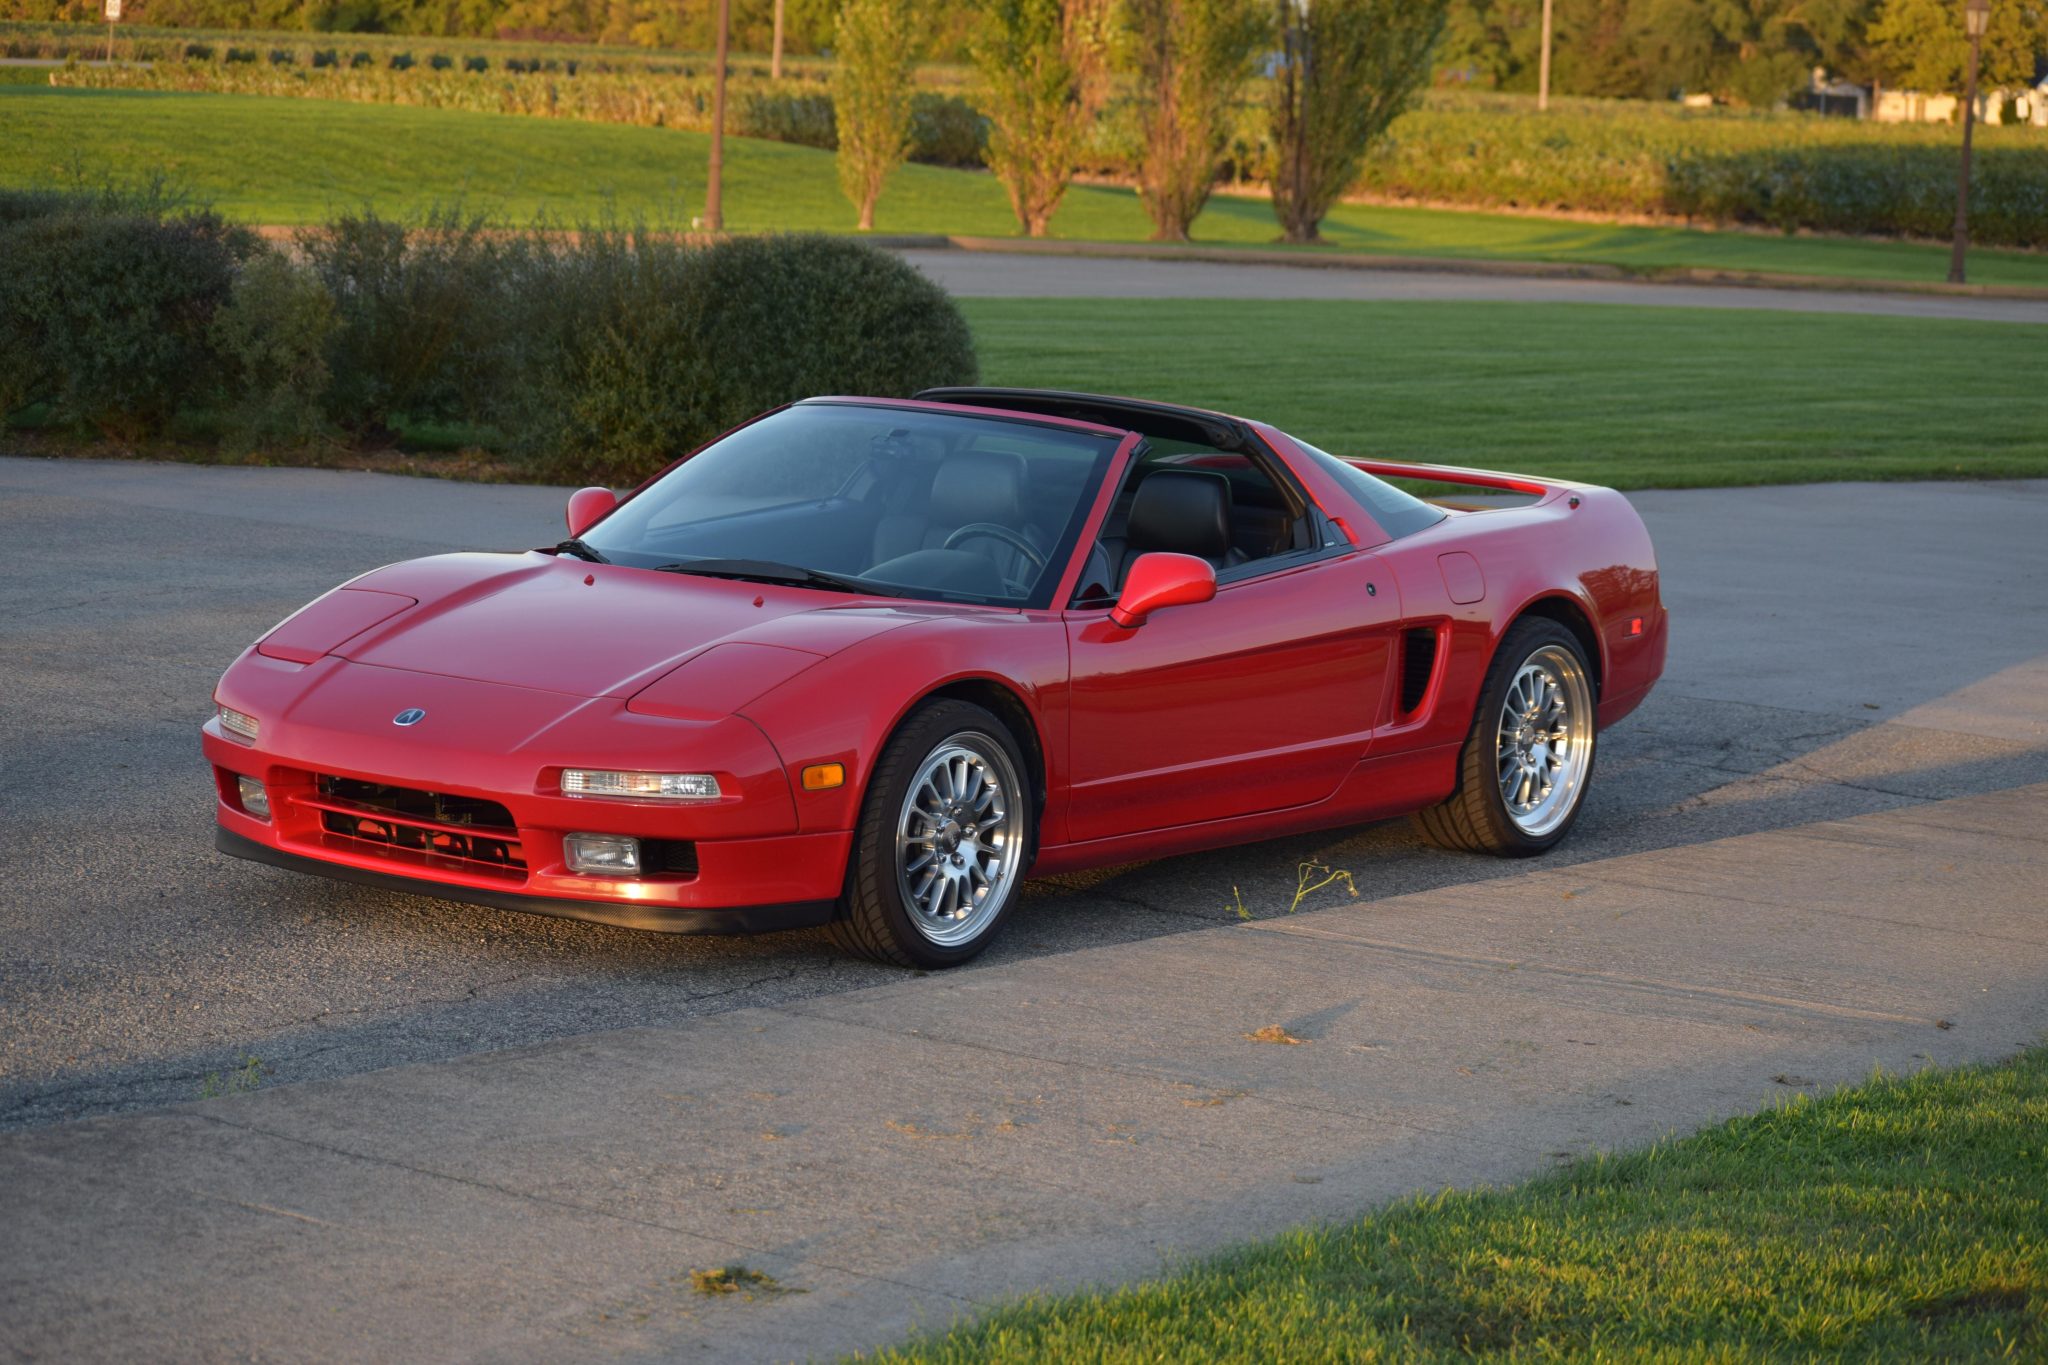 Bold Formula Red 41k-Mile 1997 Acura NSX-T Will Gladly Show an Icon's Worth  - autoevolution